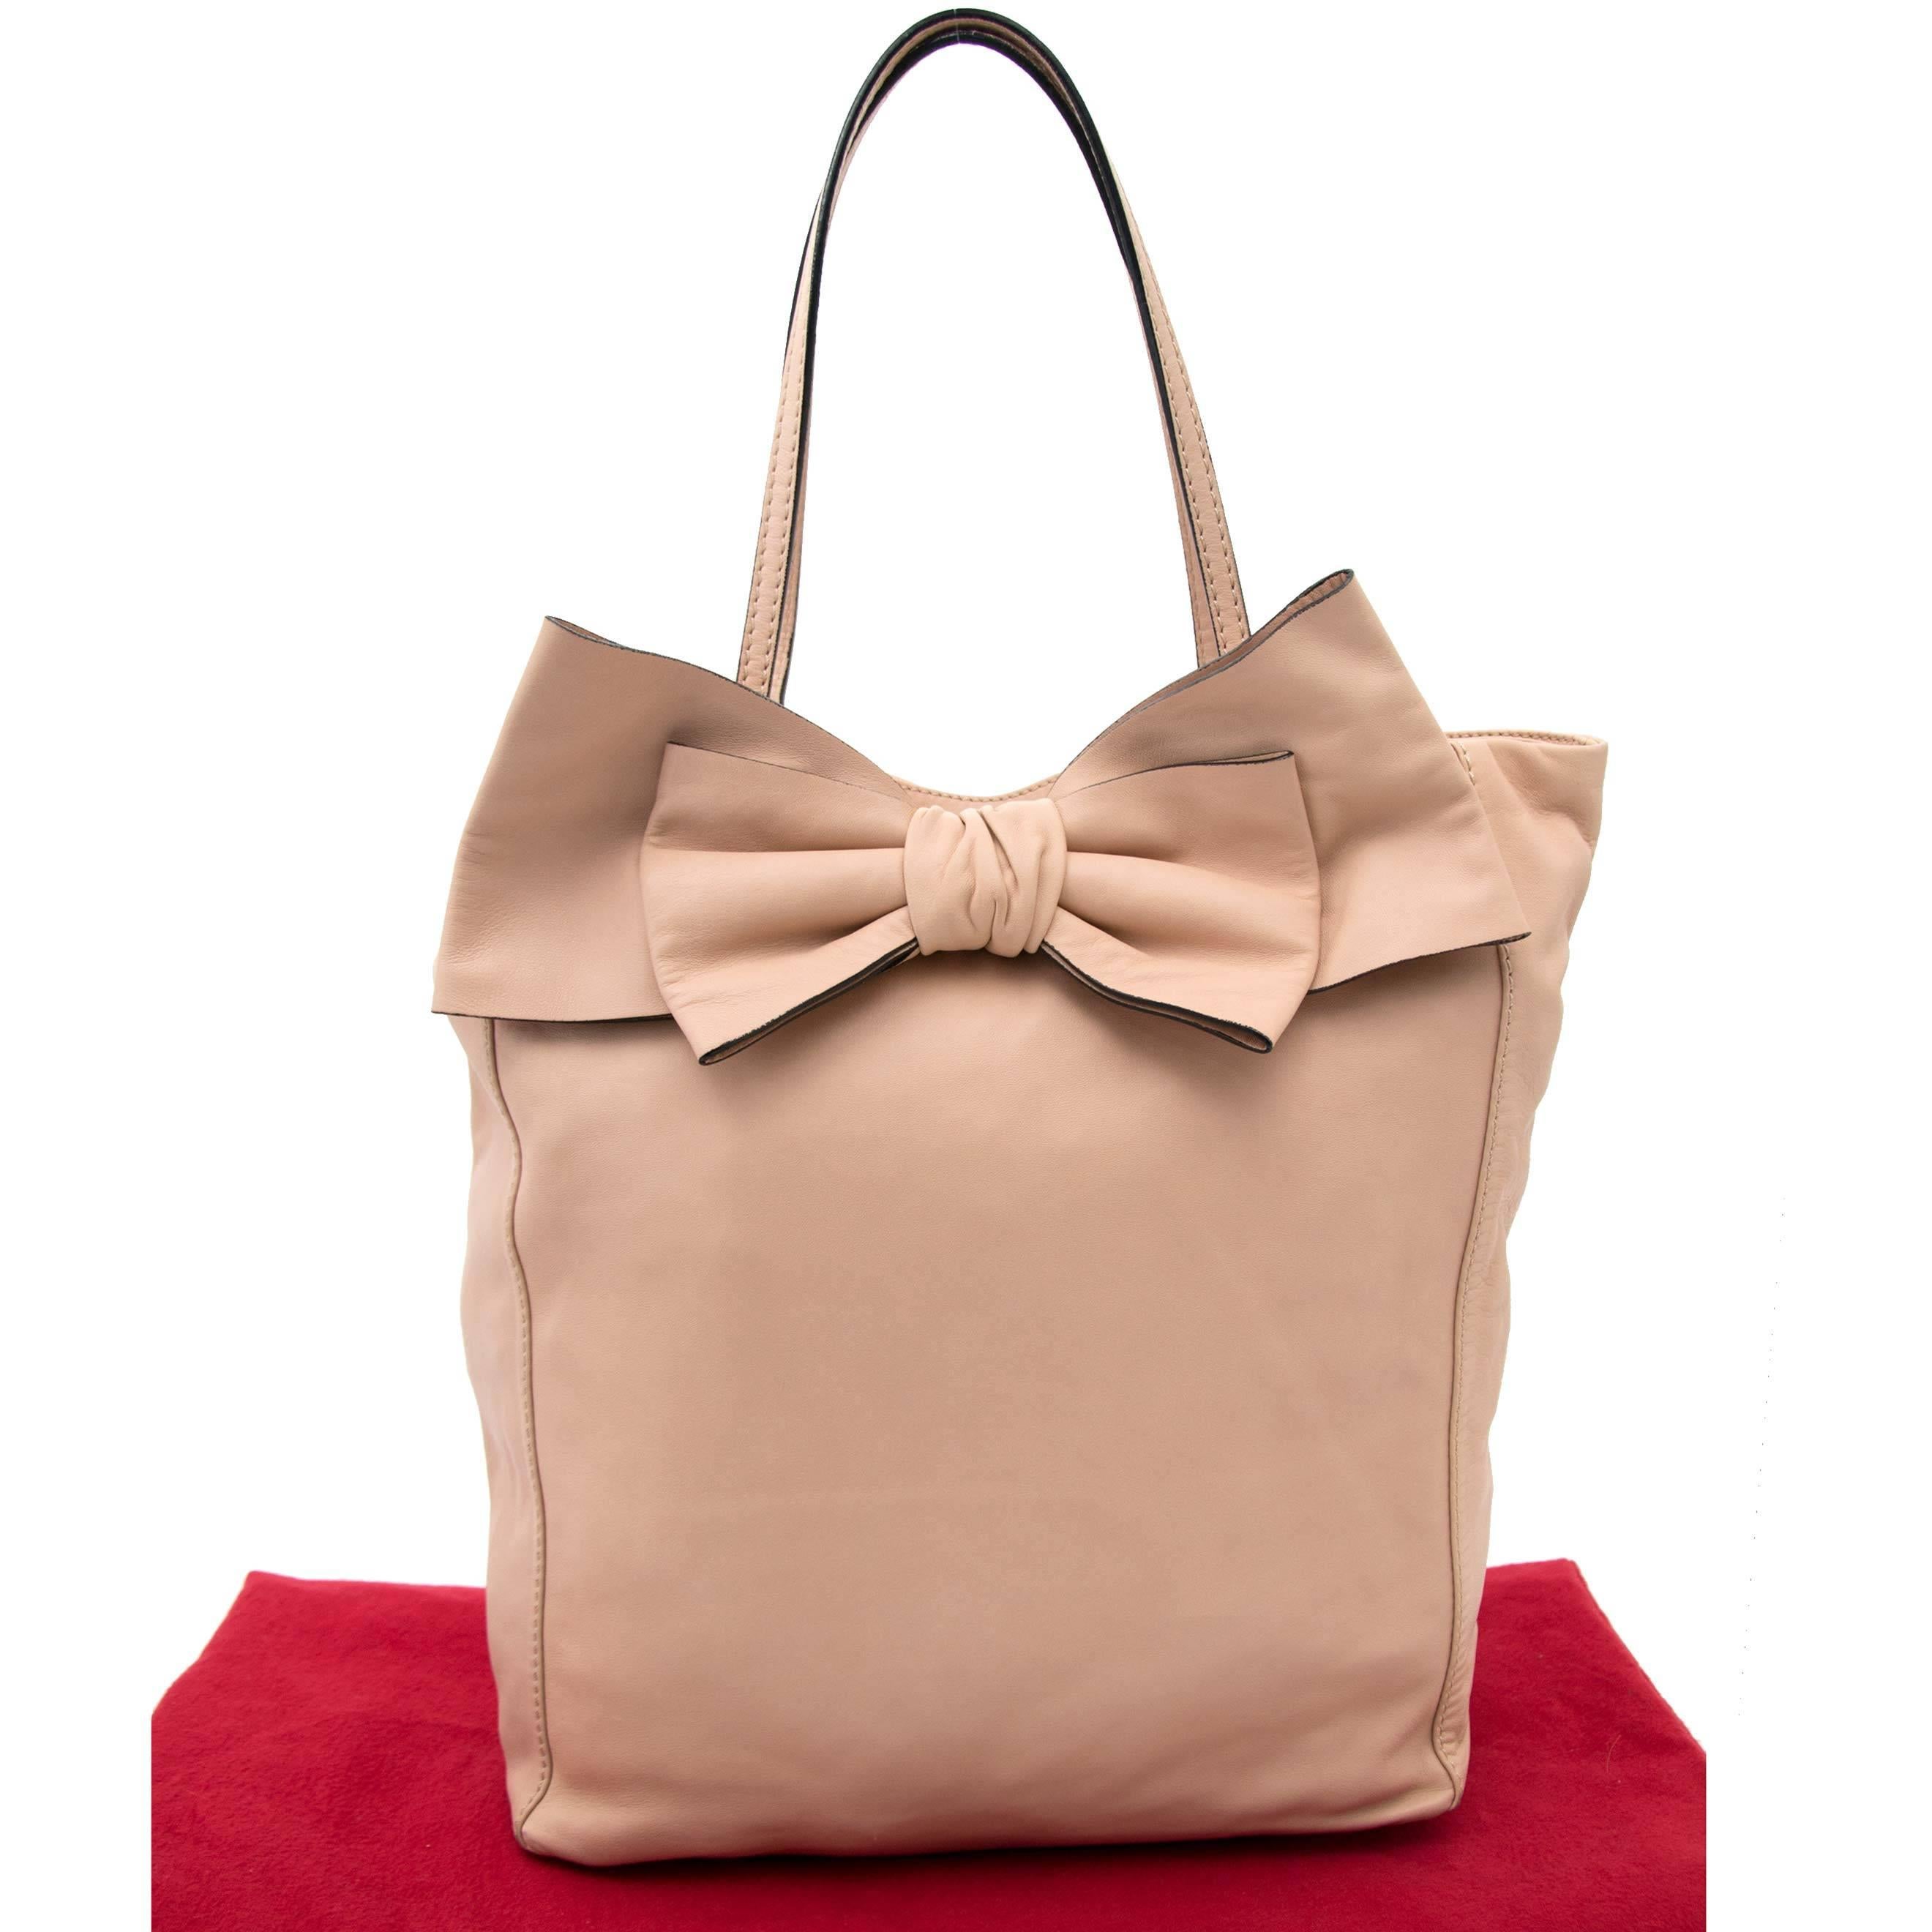 Very good condition

Valentino Blush Pink Leather Bow Tote

Tote around town with this pactical and spacious leather tote by Italian Valentino.

The pink blush color will match just about anything in your closet, the shoulder straps are delicate yet